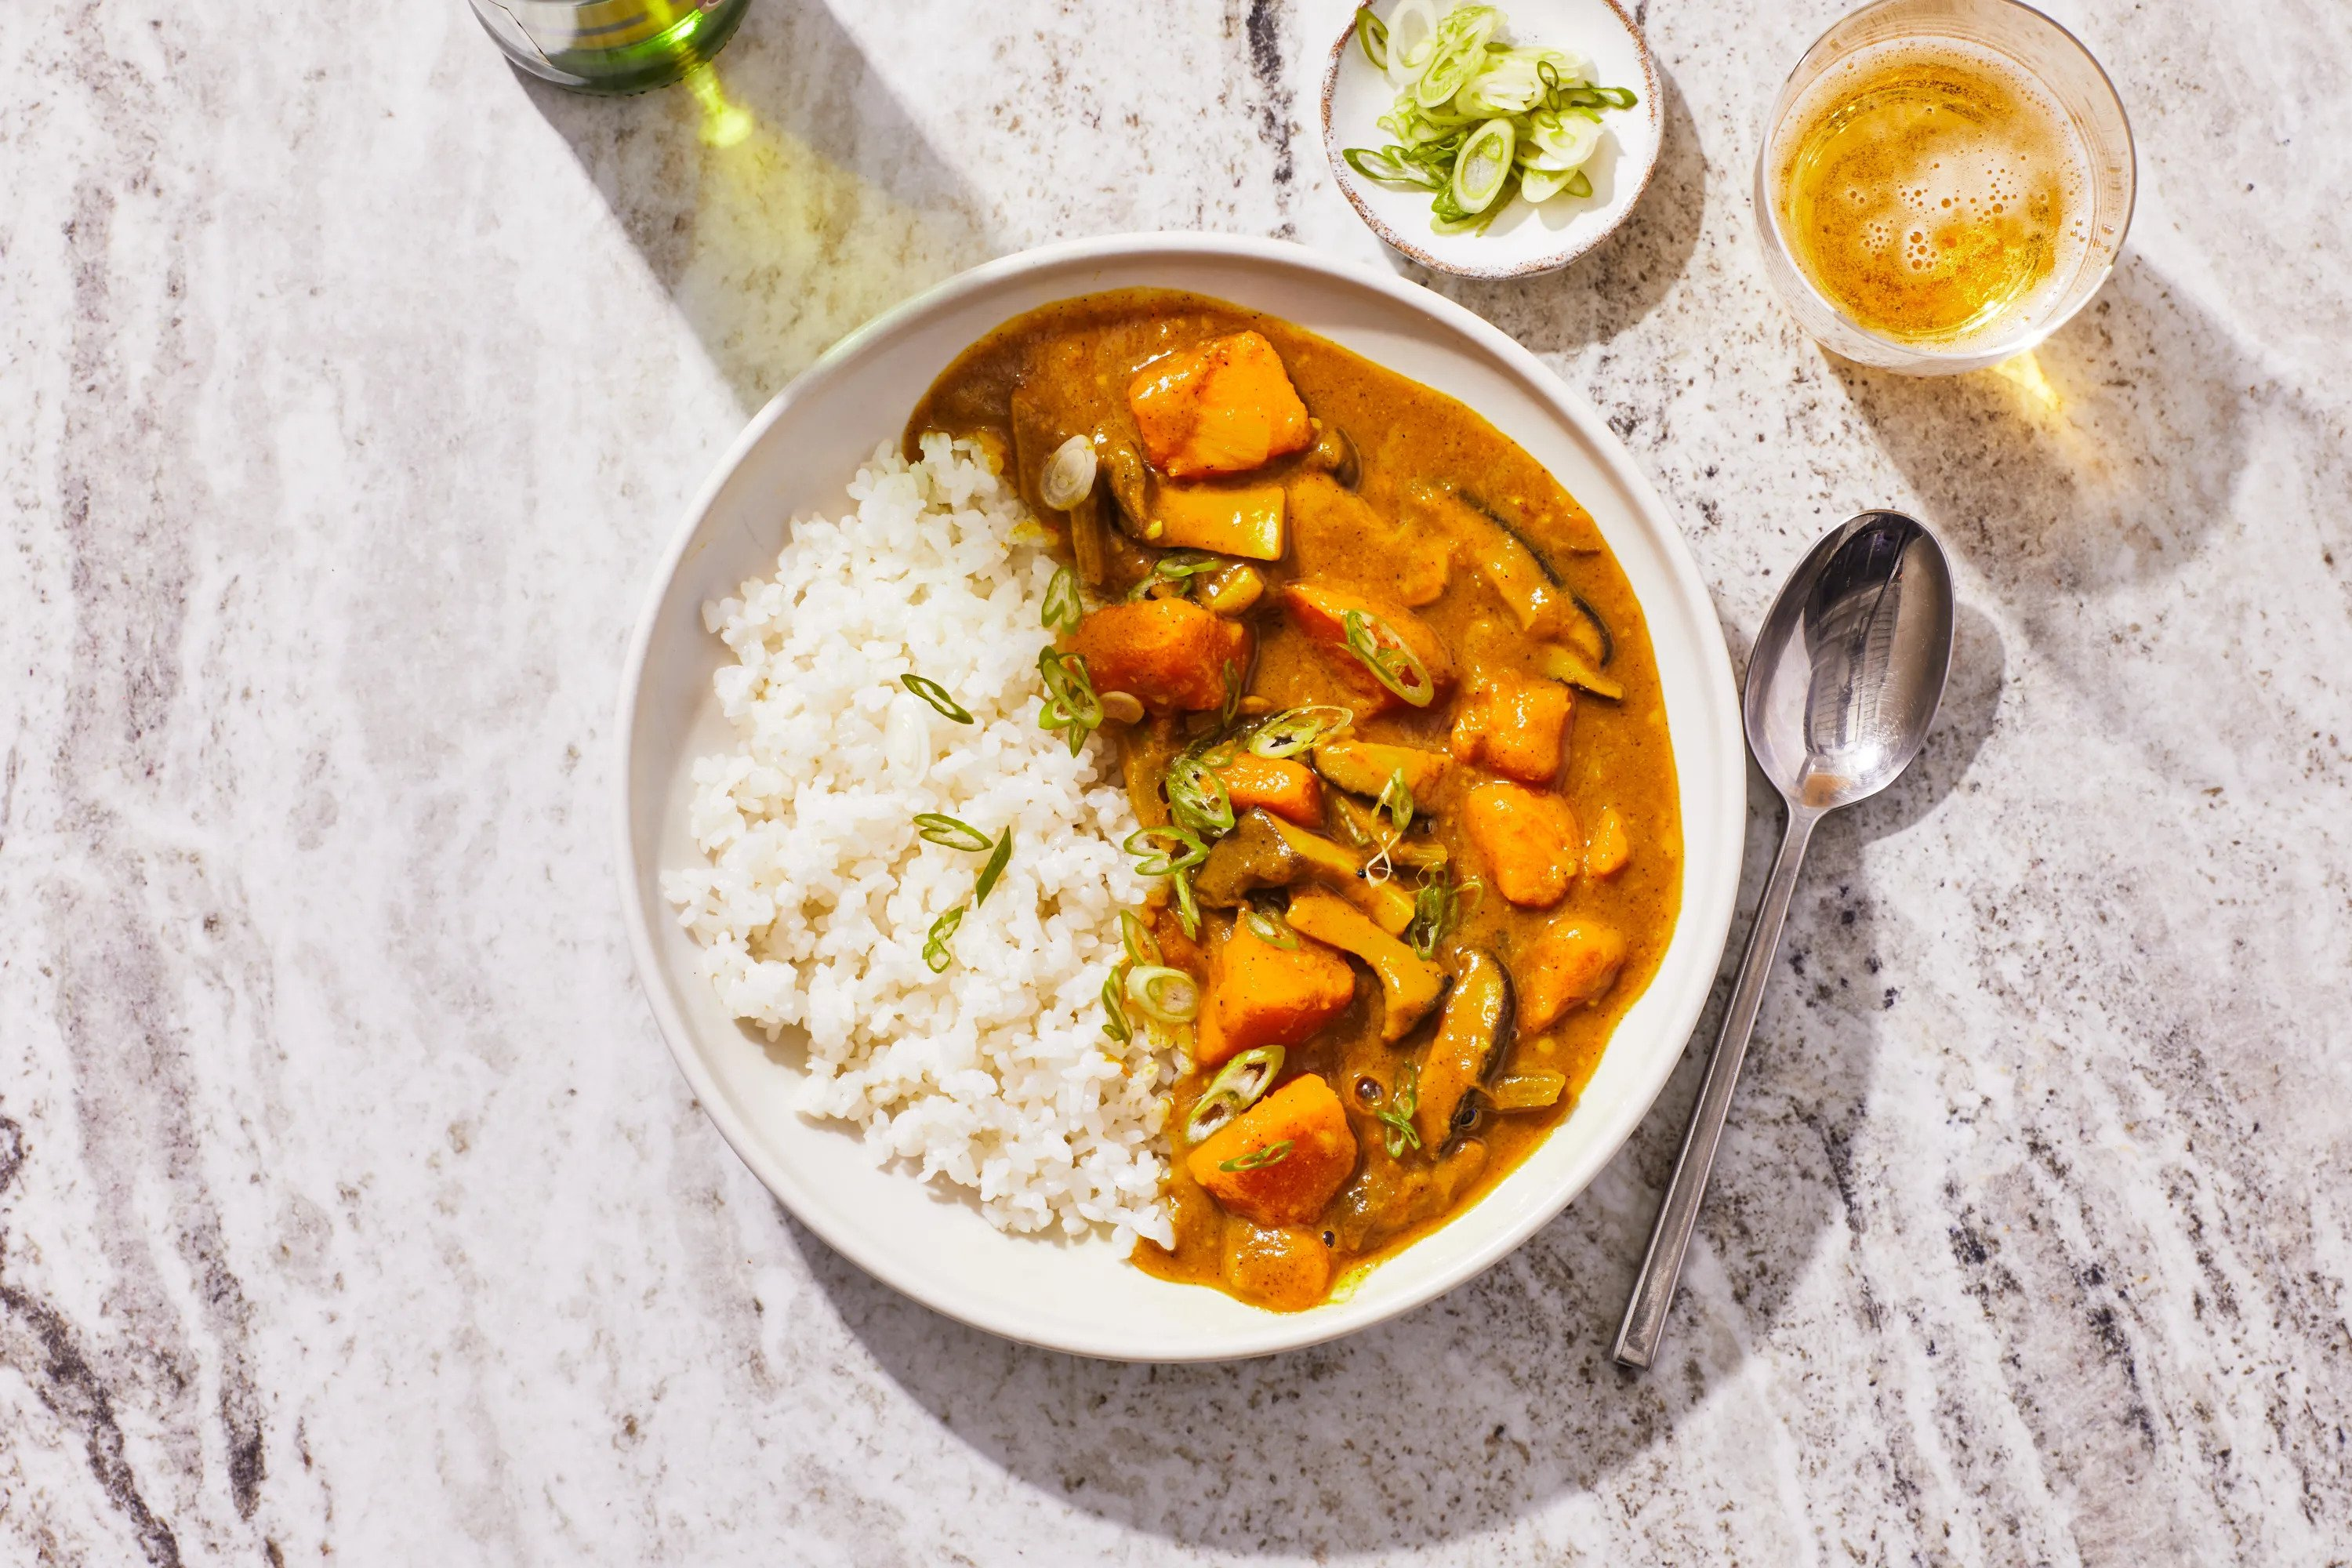 Japanese Curry With Winter Squash and Mushrooms, Photograph By Isa Zapata